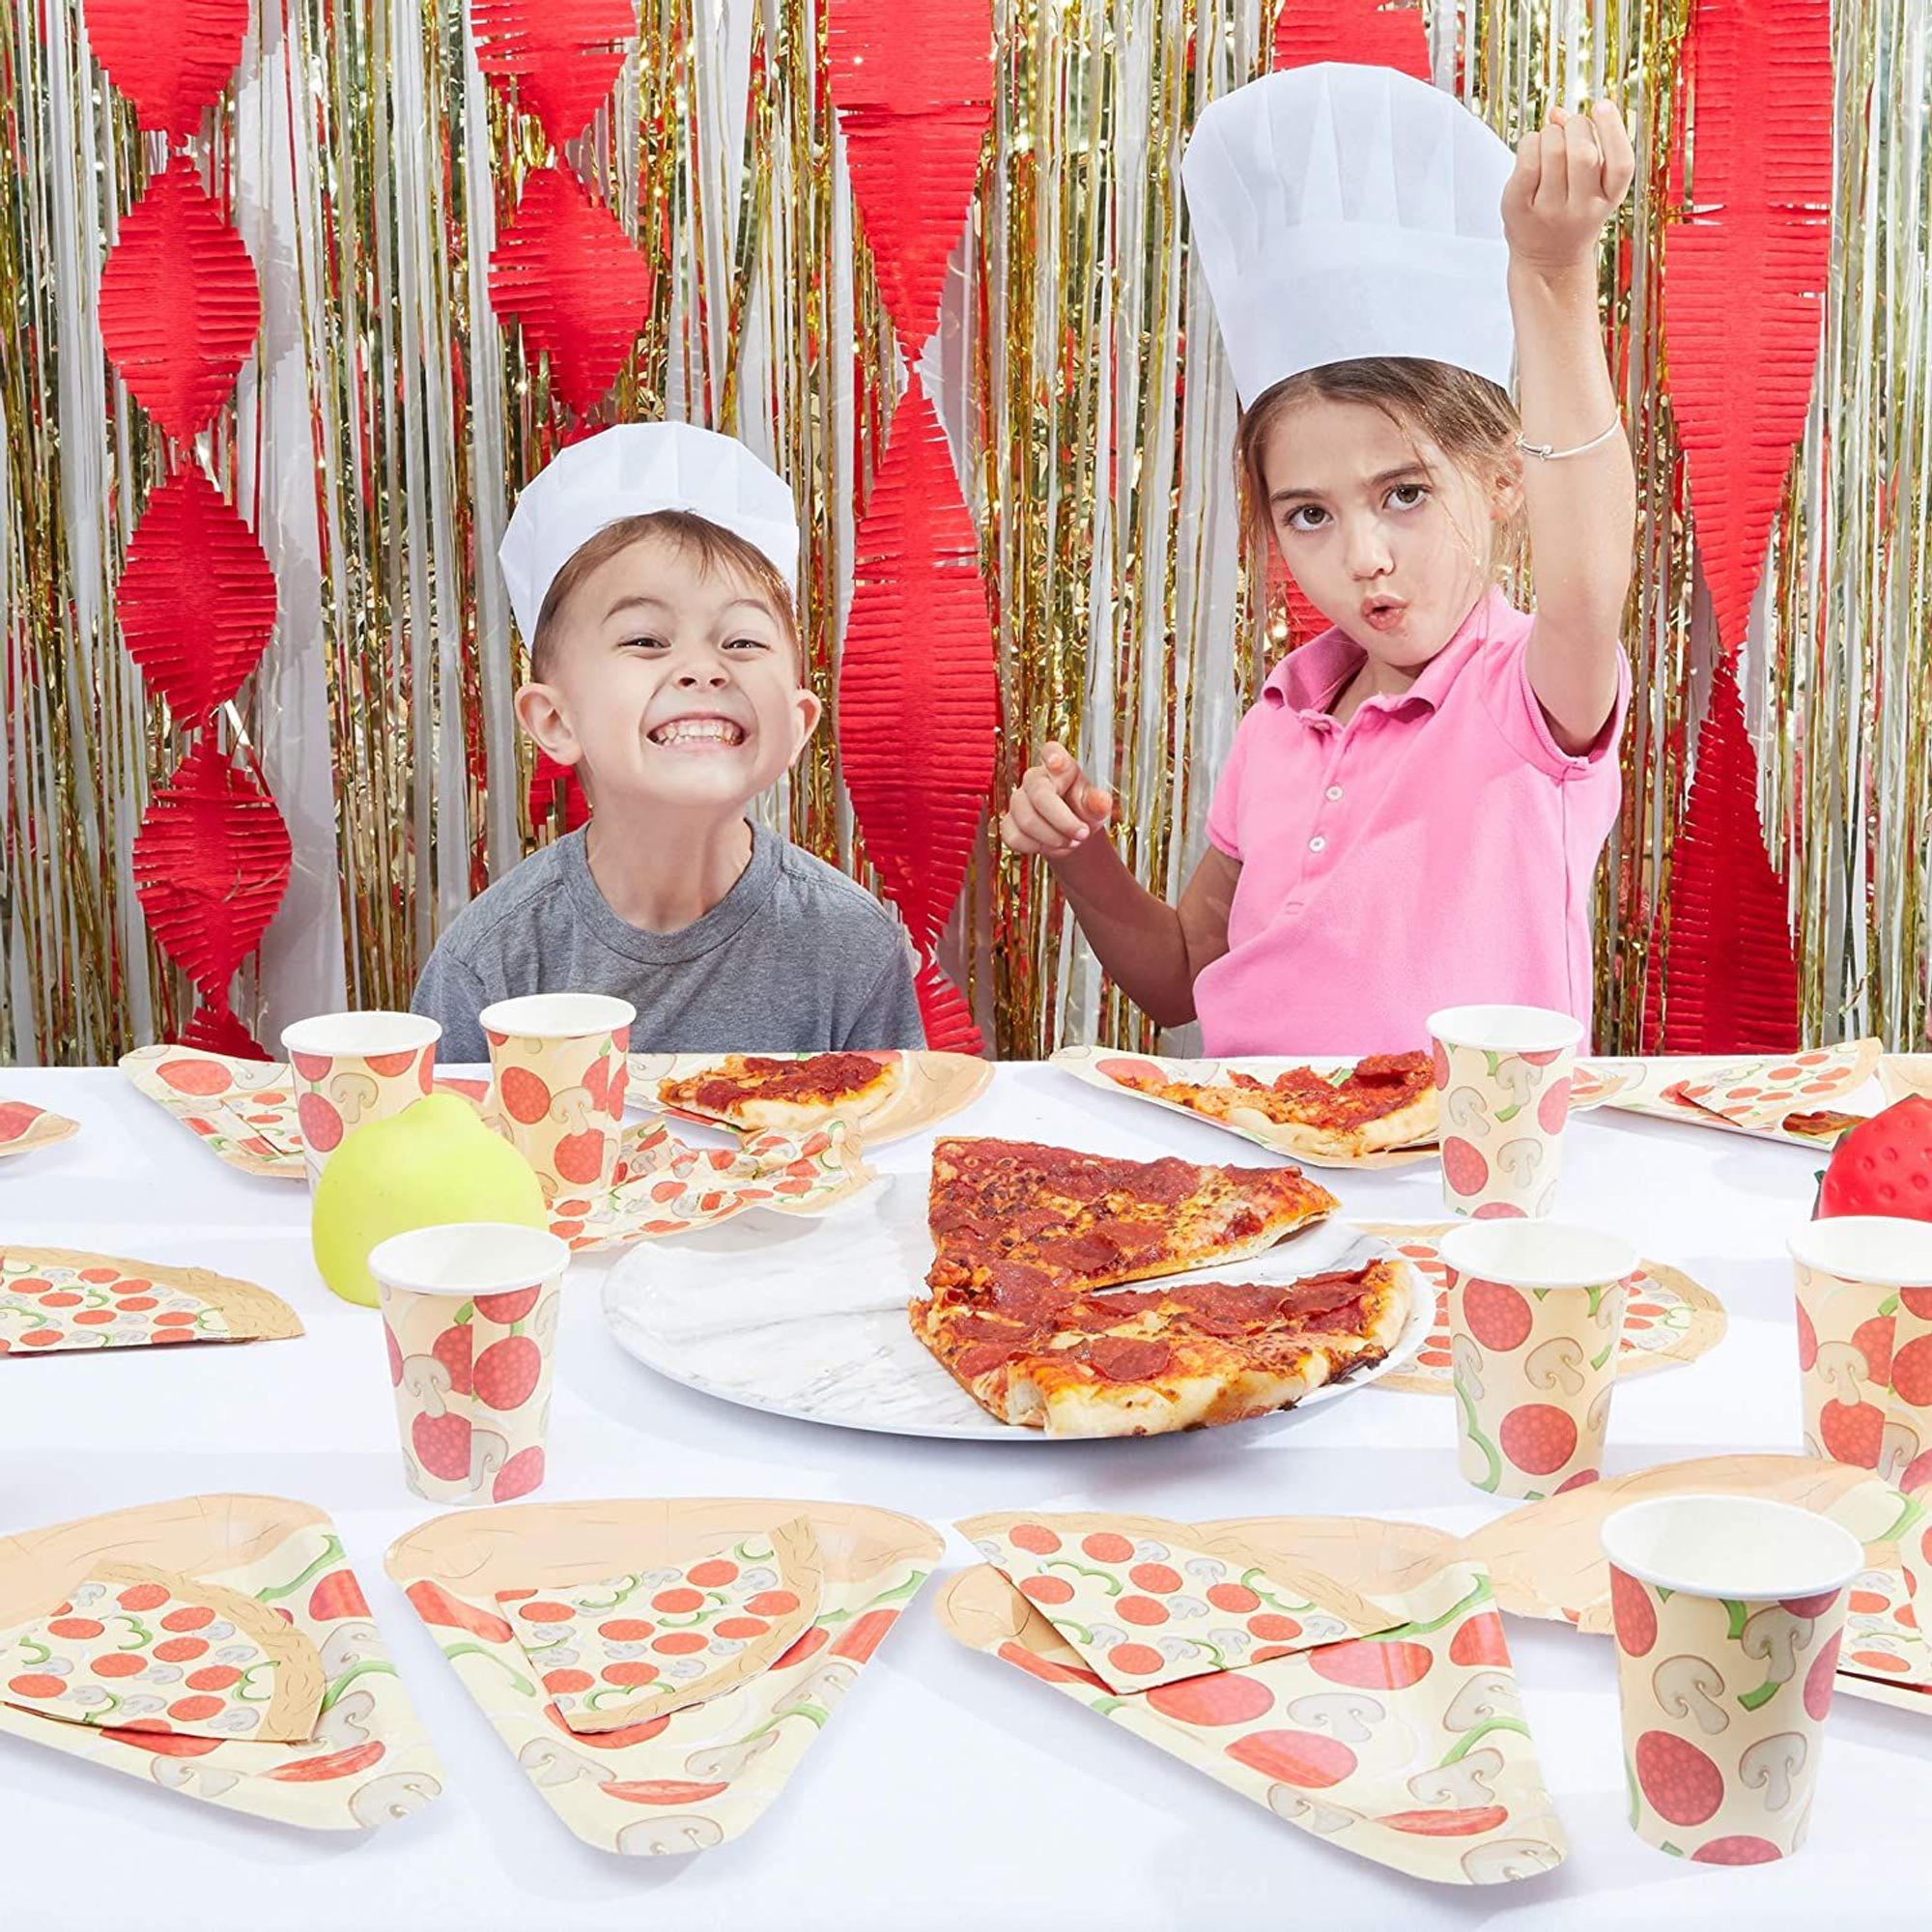 Pizza Party Supplies Kit, Includes Plates, Napkins and Cups (Serves 24 Guests) - image 3 of 8